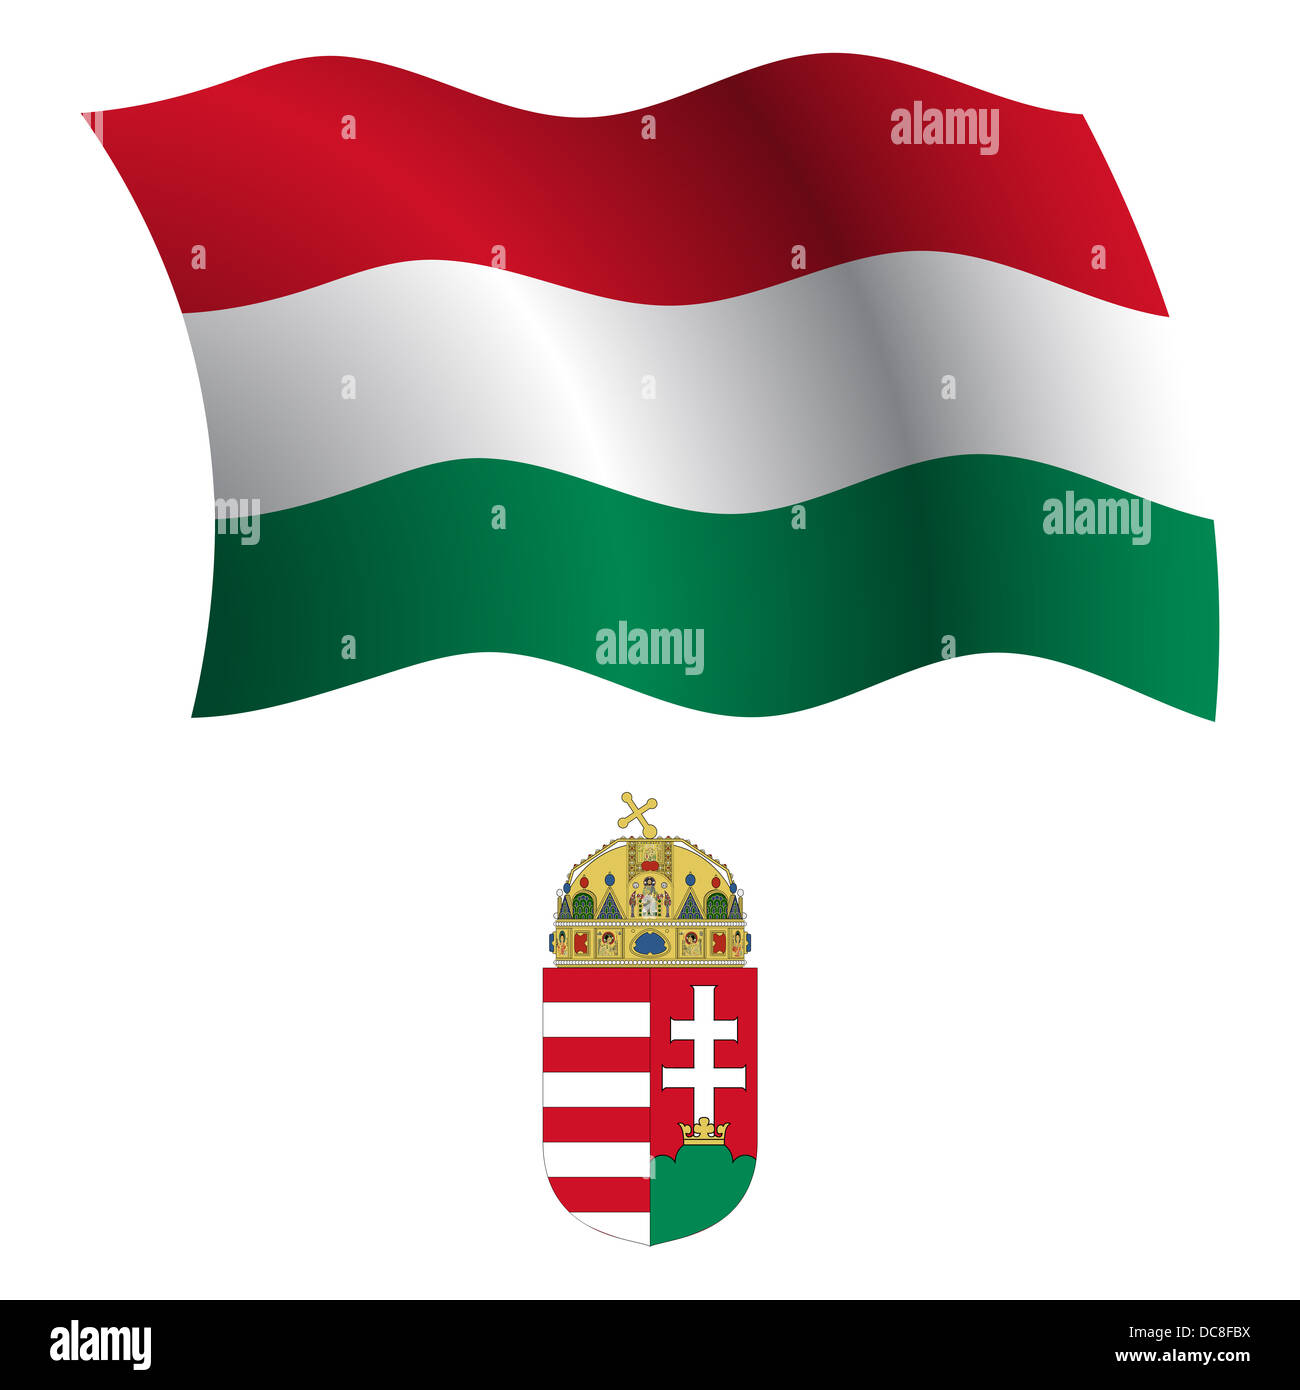 hungary wavy flag and coat of arms against white background, vector art illustration, image contains transparency Stock Photo